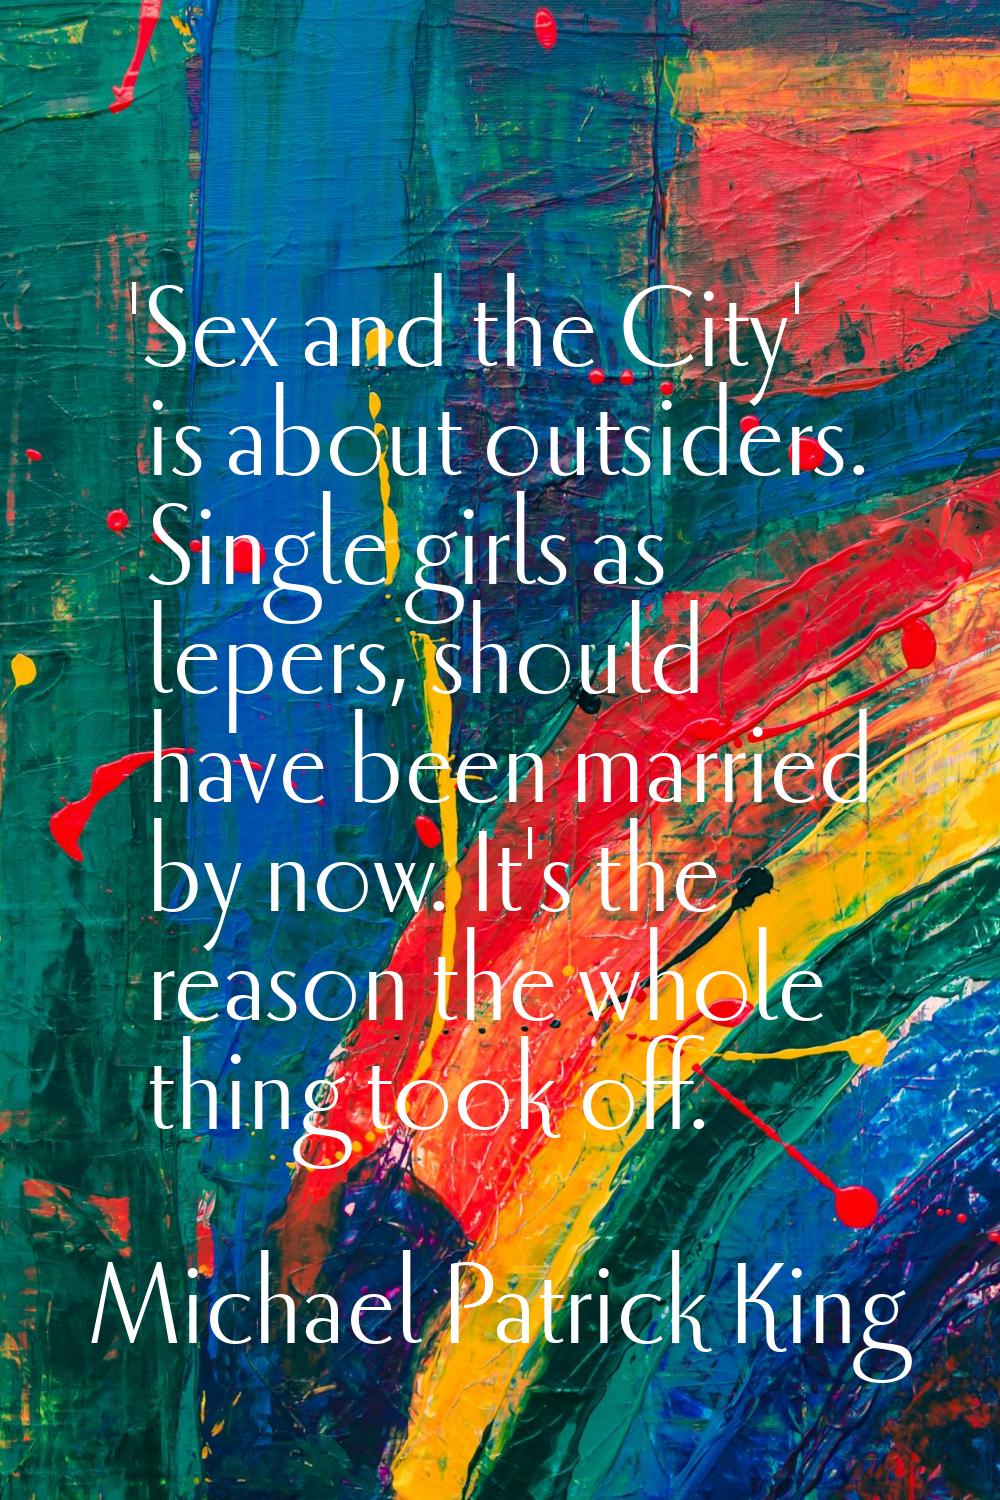 'Sex and the City' is about outsiders. Single girls as lepers, should have been married by now. It'